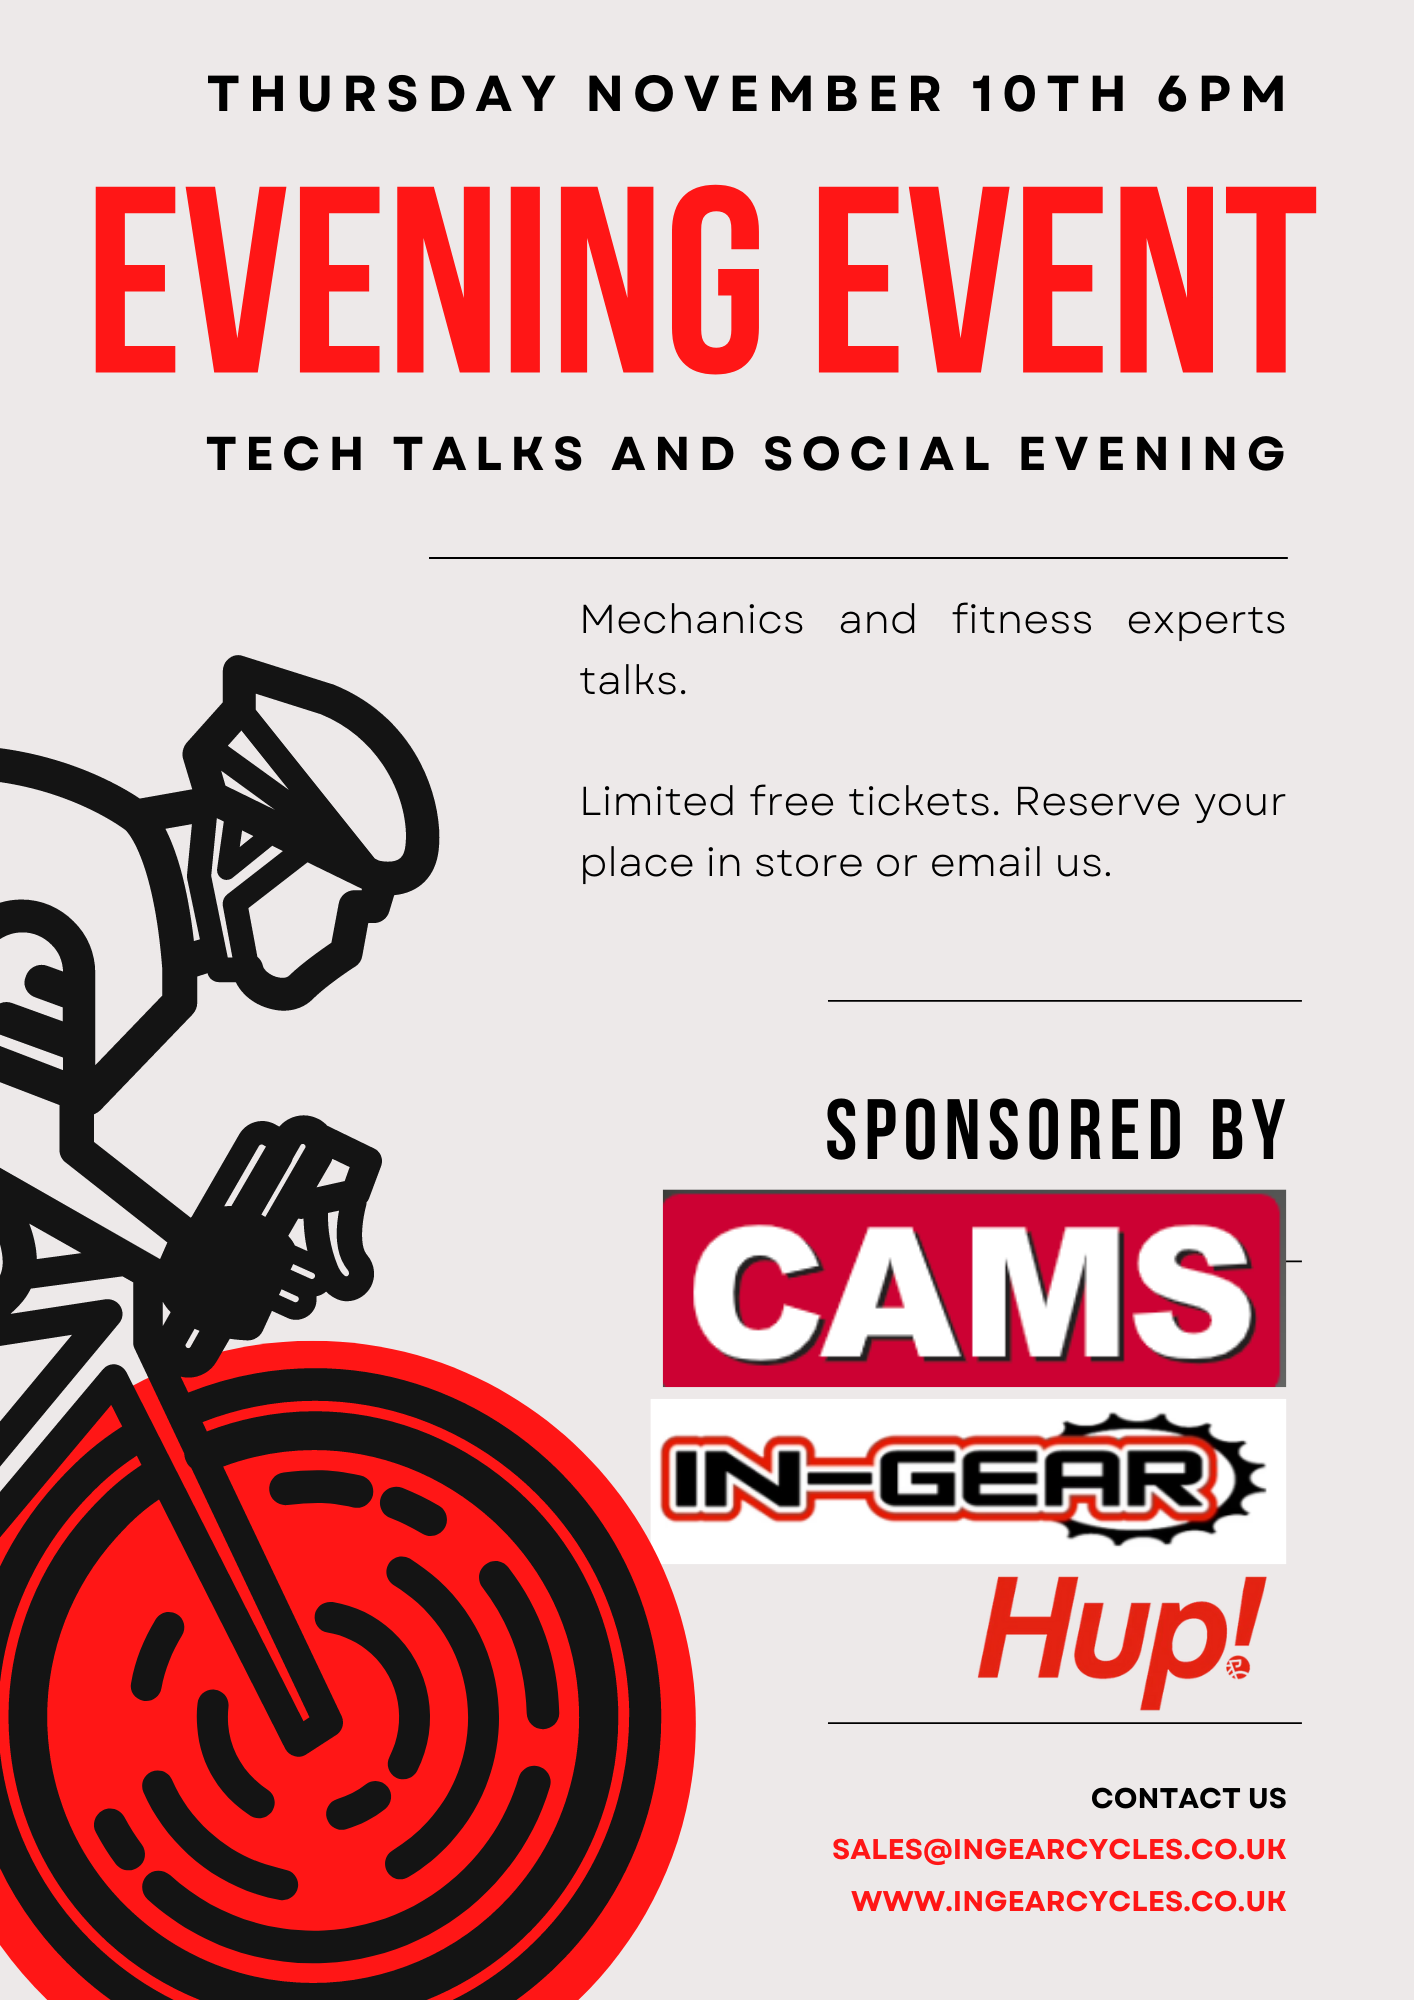 Save the date - November 10th @ 6pm - Tech Talks + Social at In Gear - Sponsored by CAMS